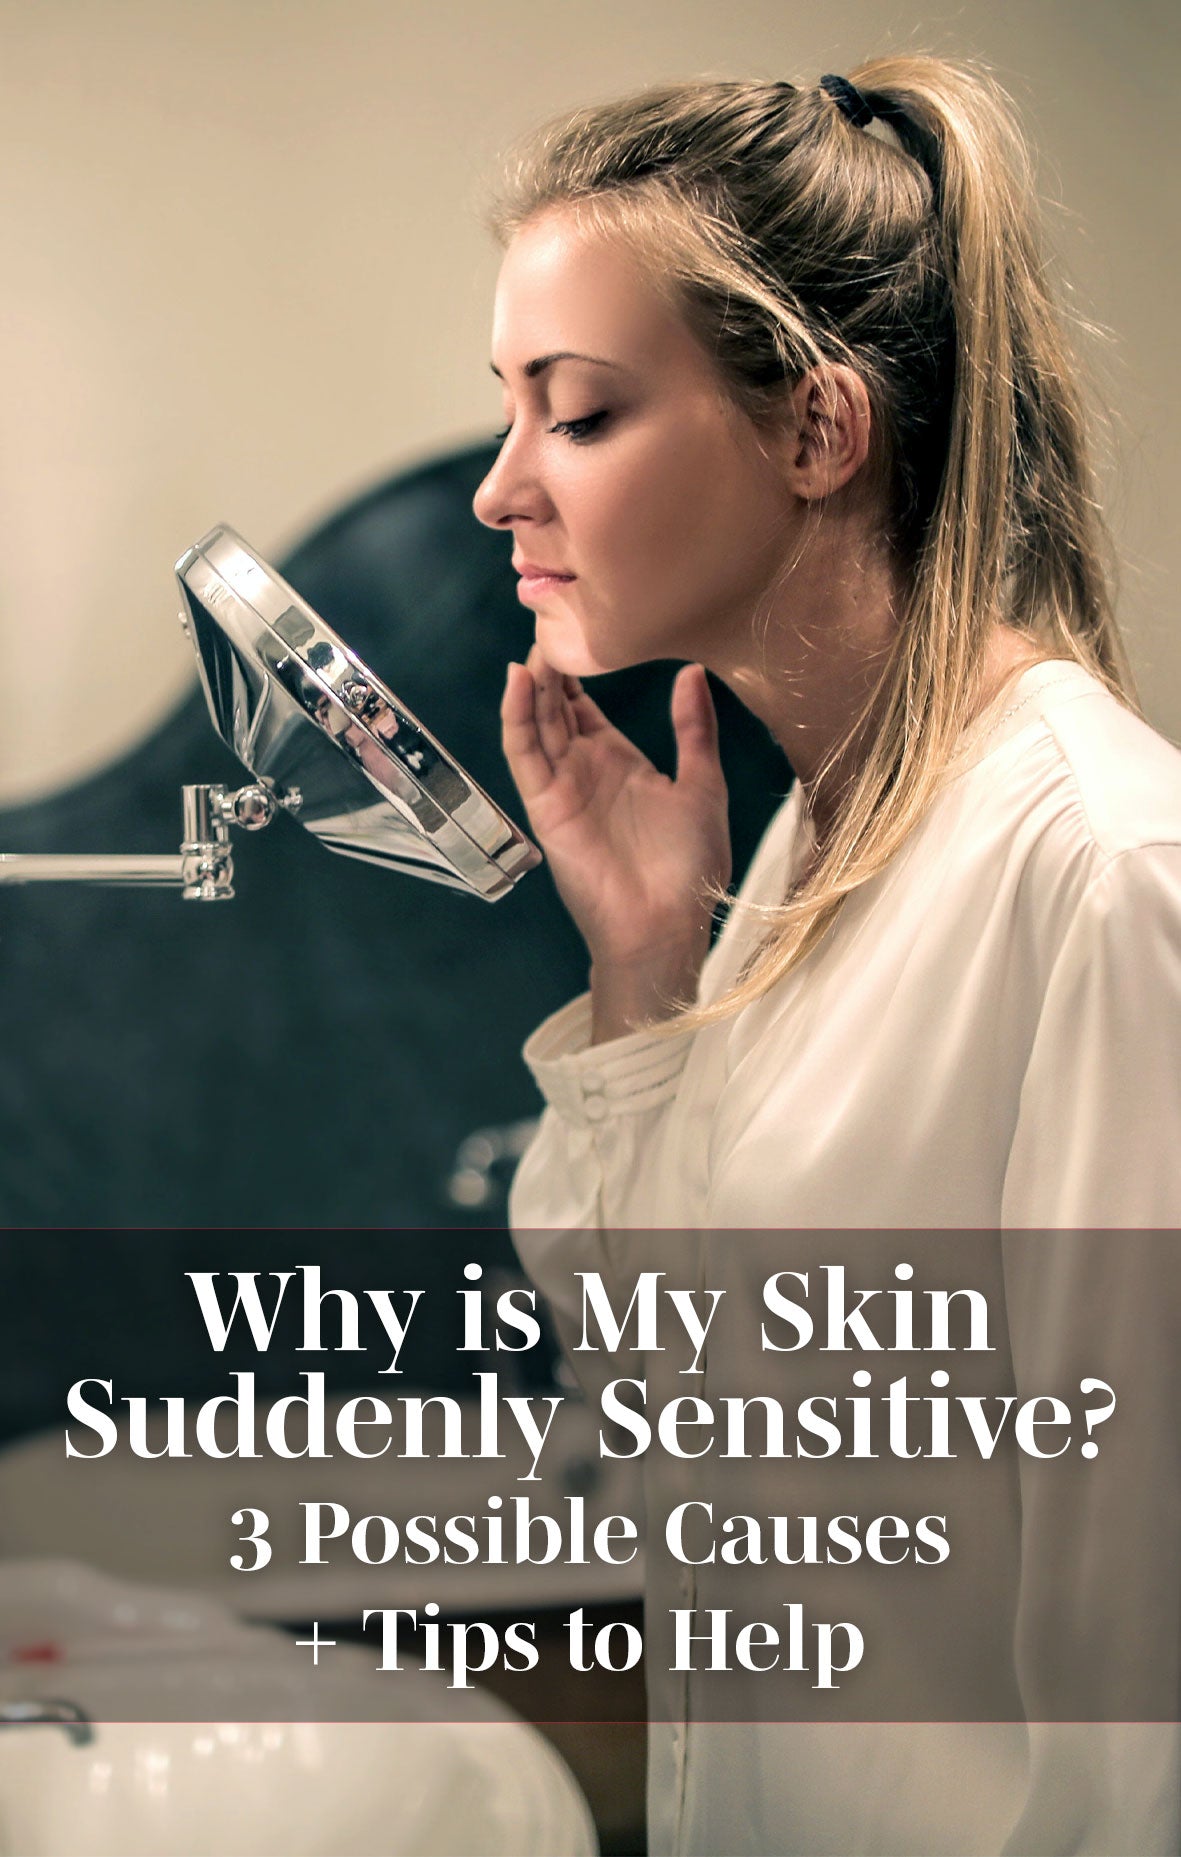 Why is My Skin Suddenly Sensitive? 3 Possible Causes + Tips to Help